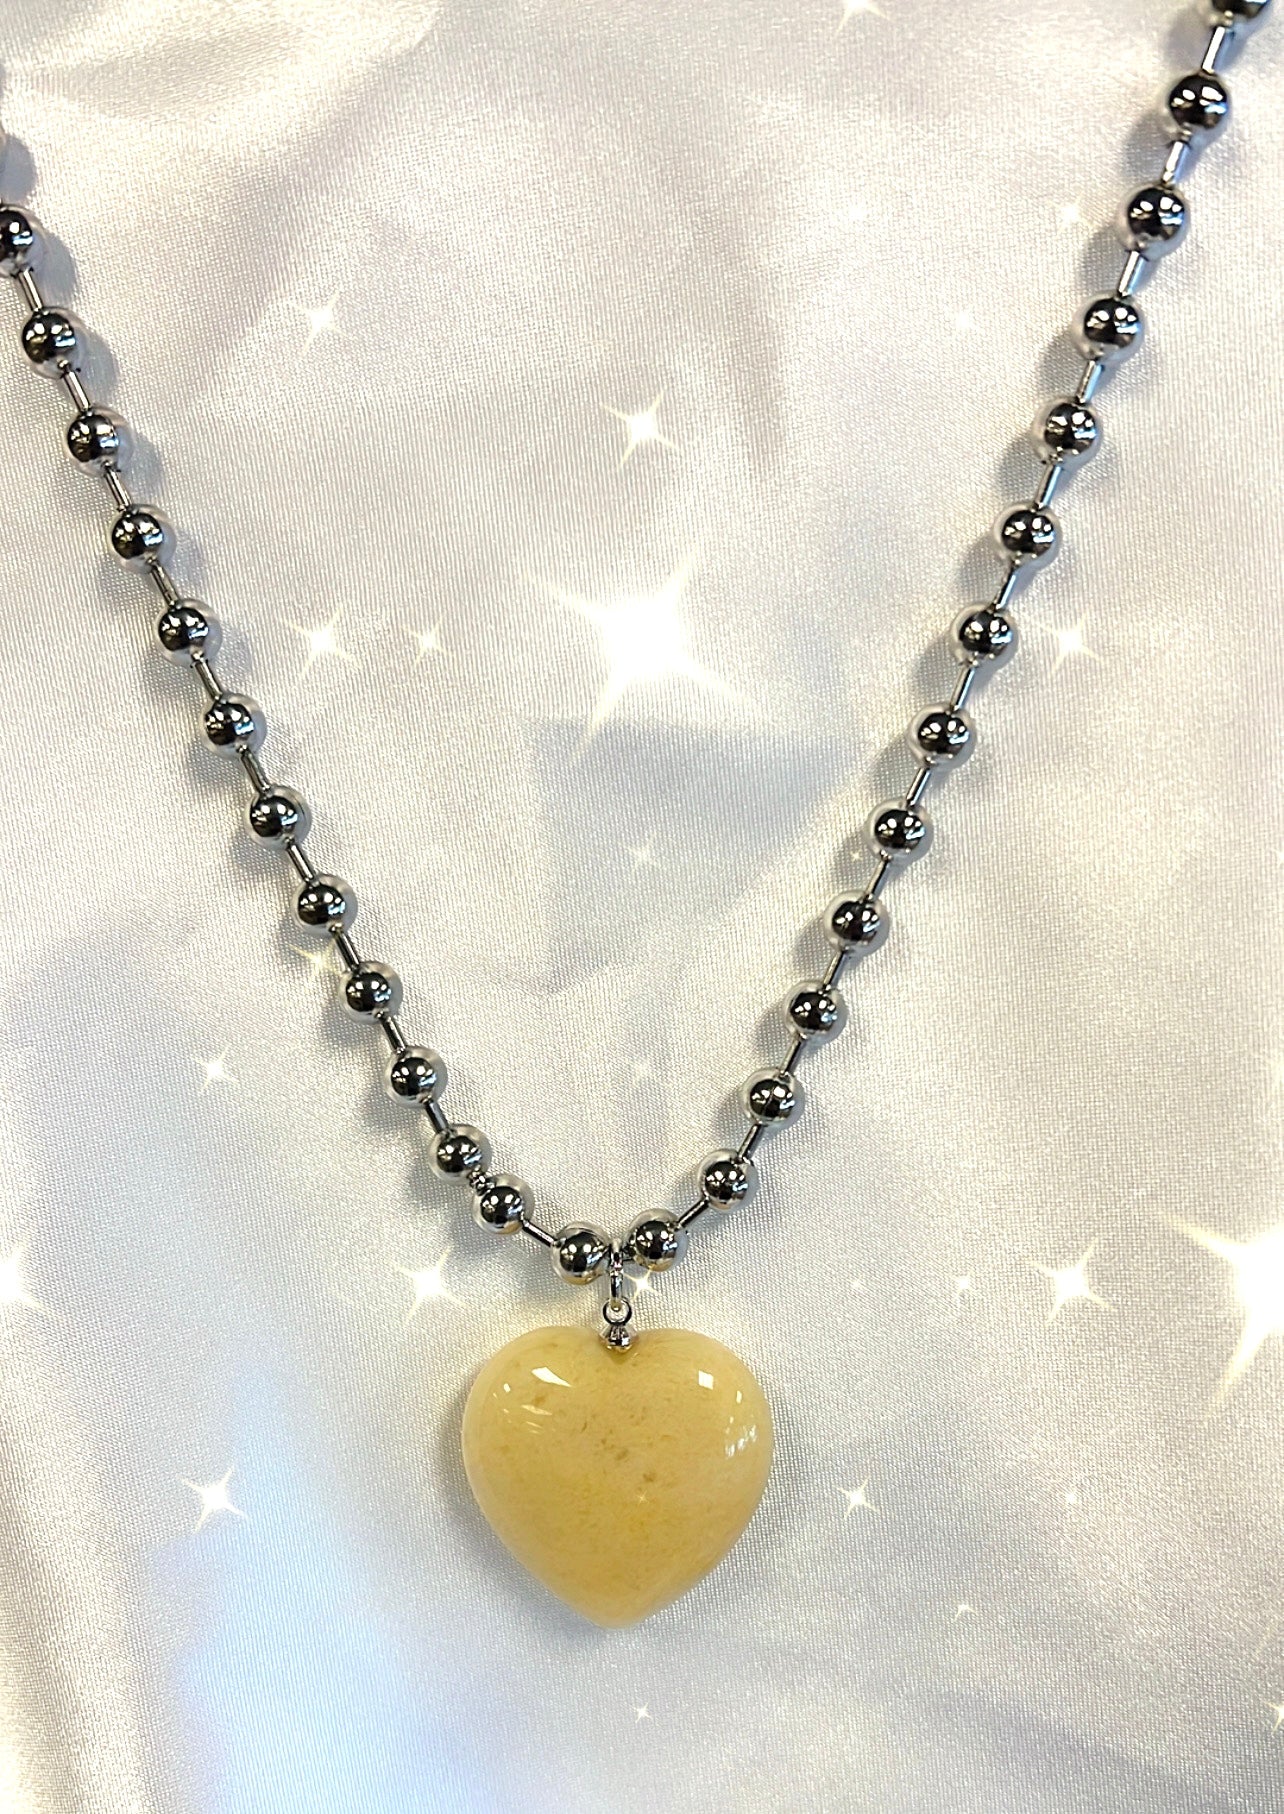 GOLDEN HEALER BALL CHAIN HEART NECKLACE- 963hz, clear blockages, multi-healing, raise your vibration, the God frequency